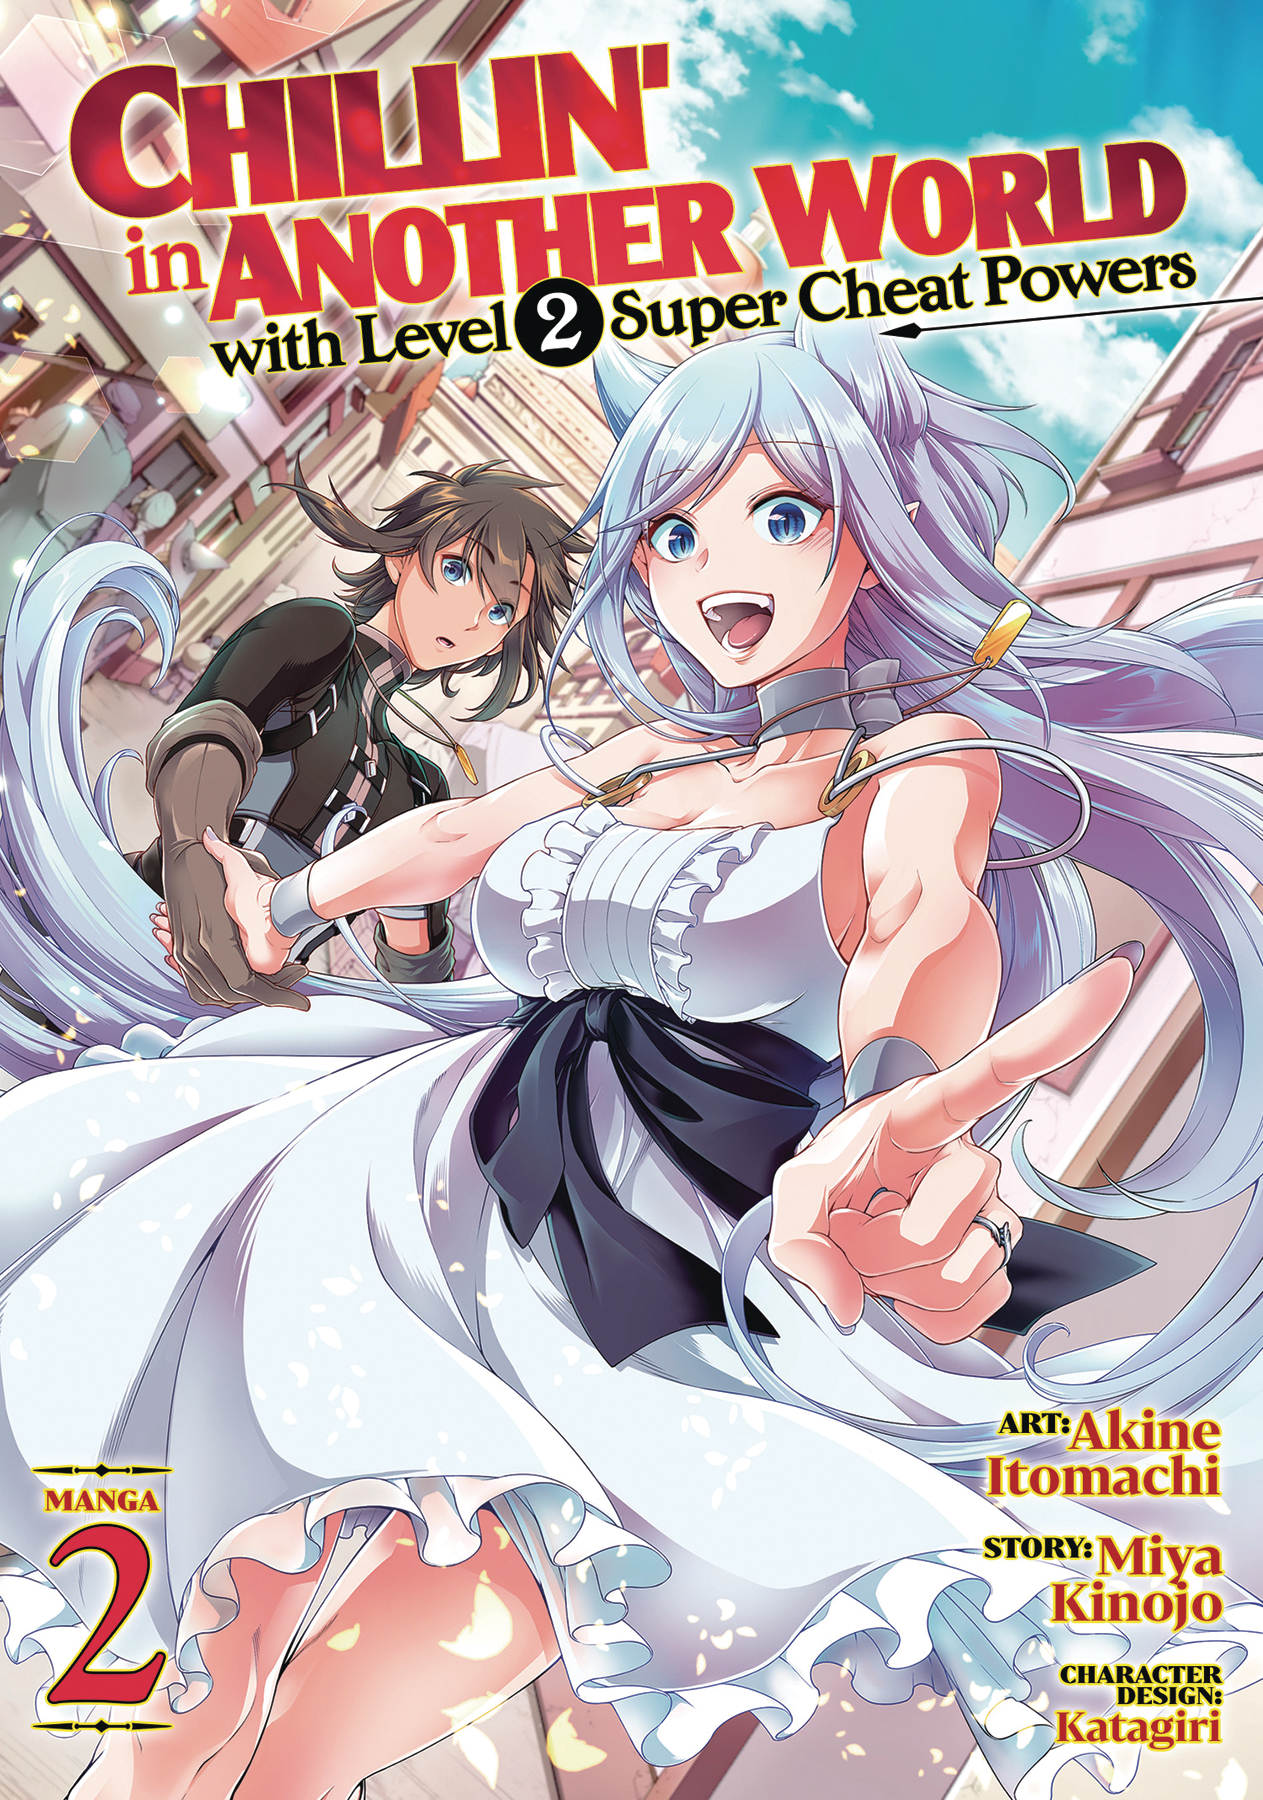 Chillin' in Another World with Level 2 Super Cheat Powers Manga Volume 2